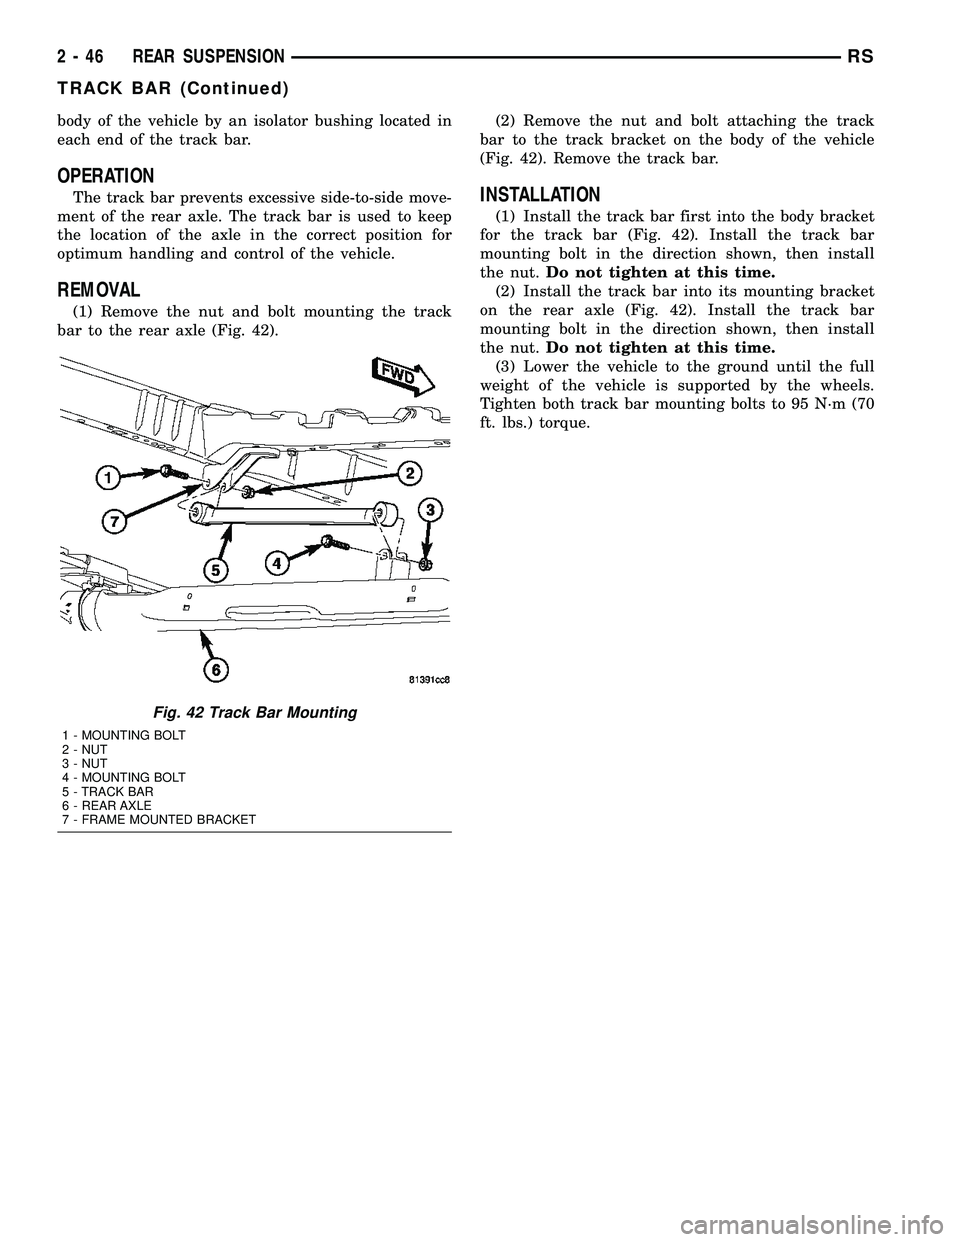 CHRYSLER CARAVAN 2005  Service Manual body of the vehicle by an isolator bushing located in
each end of the track bar.
OPERATION
The track bar prevents excessive side-to-side move-
ment of the rear axle. The track bar is used to keep
the 